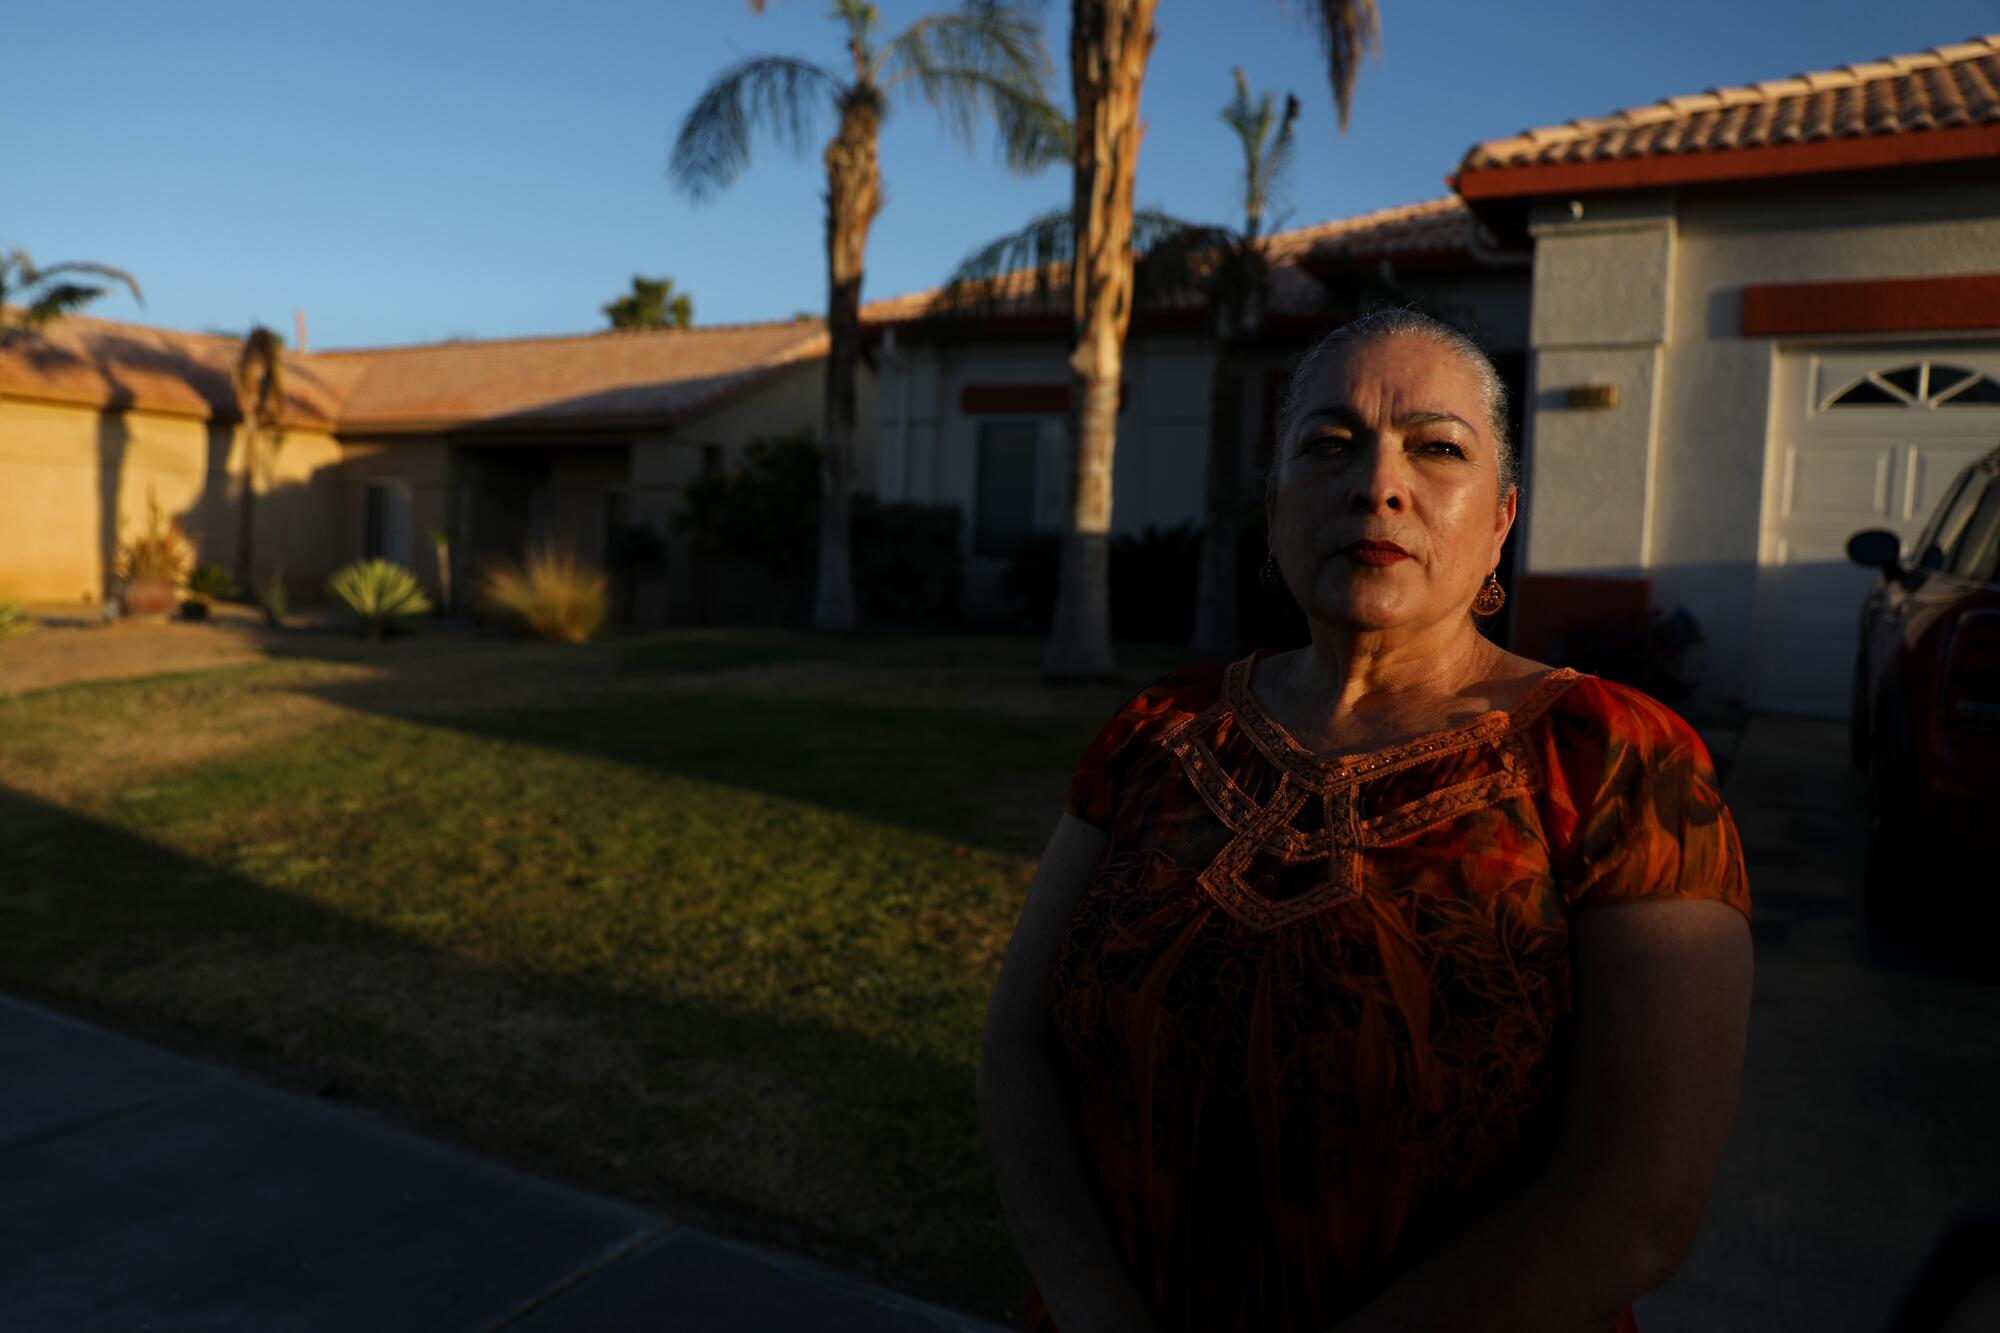 A woman stands in front of a home with palm trees 